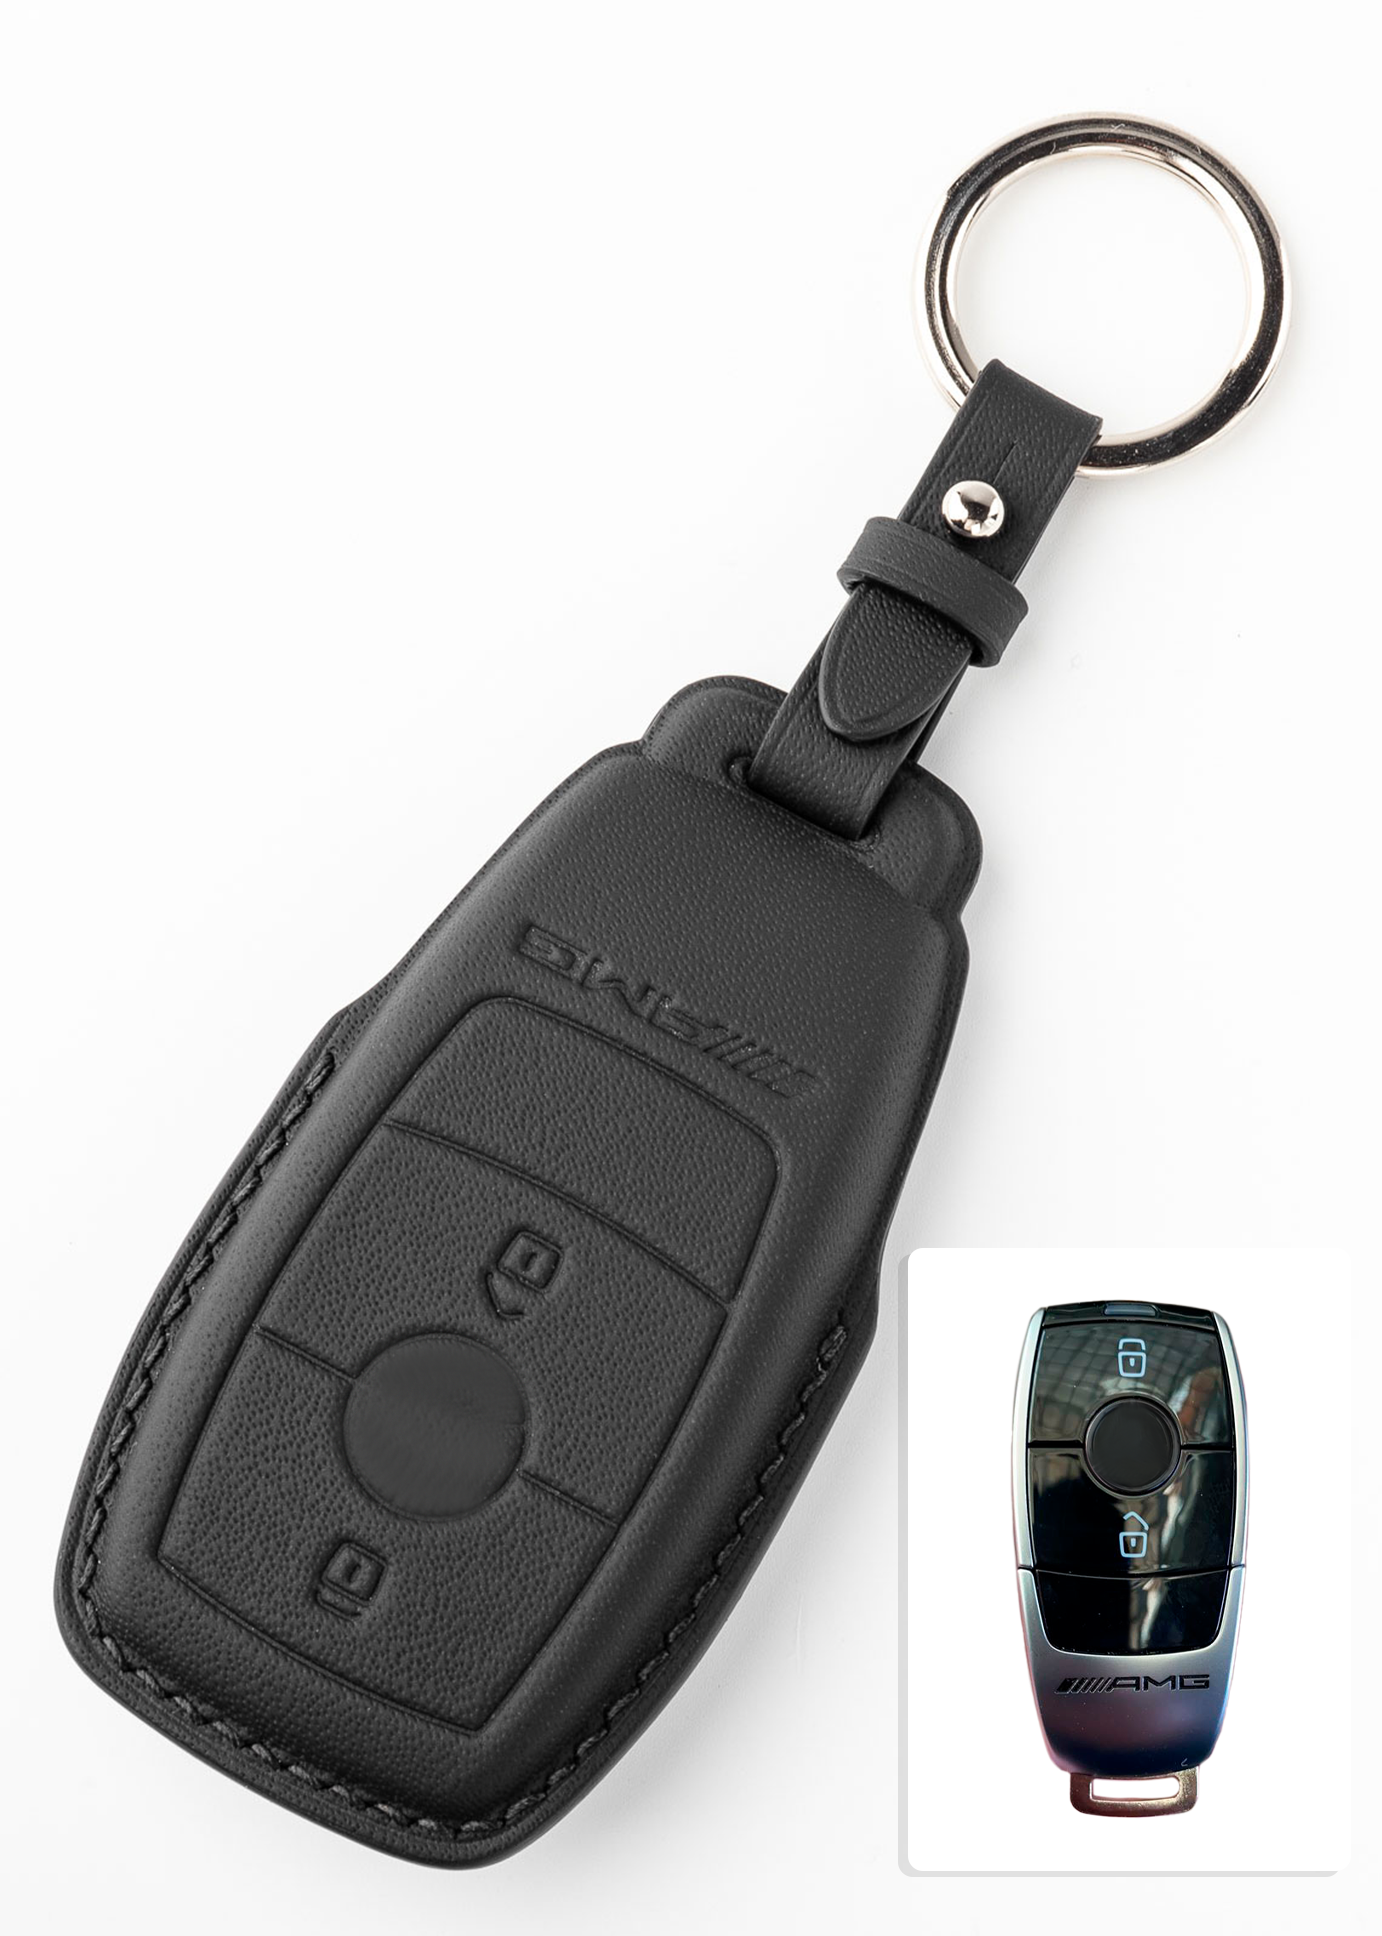 Timotheus for Mercedes AMG key fob cover case, Compatible with Mercede